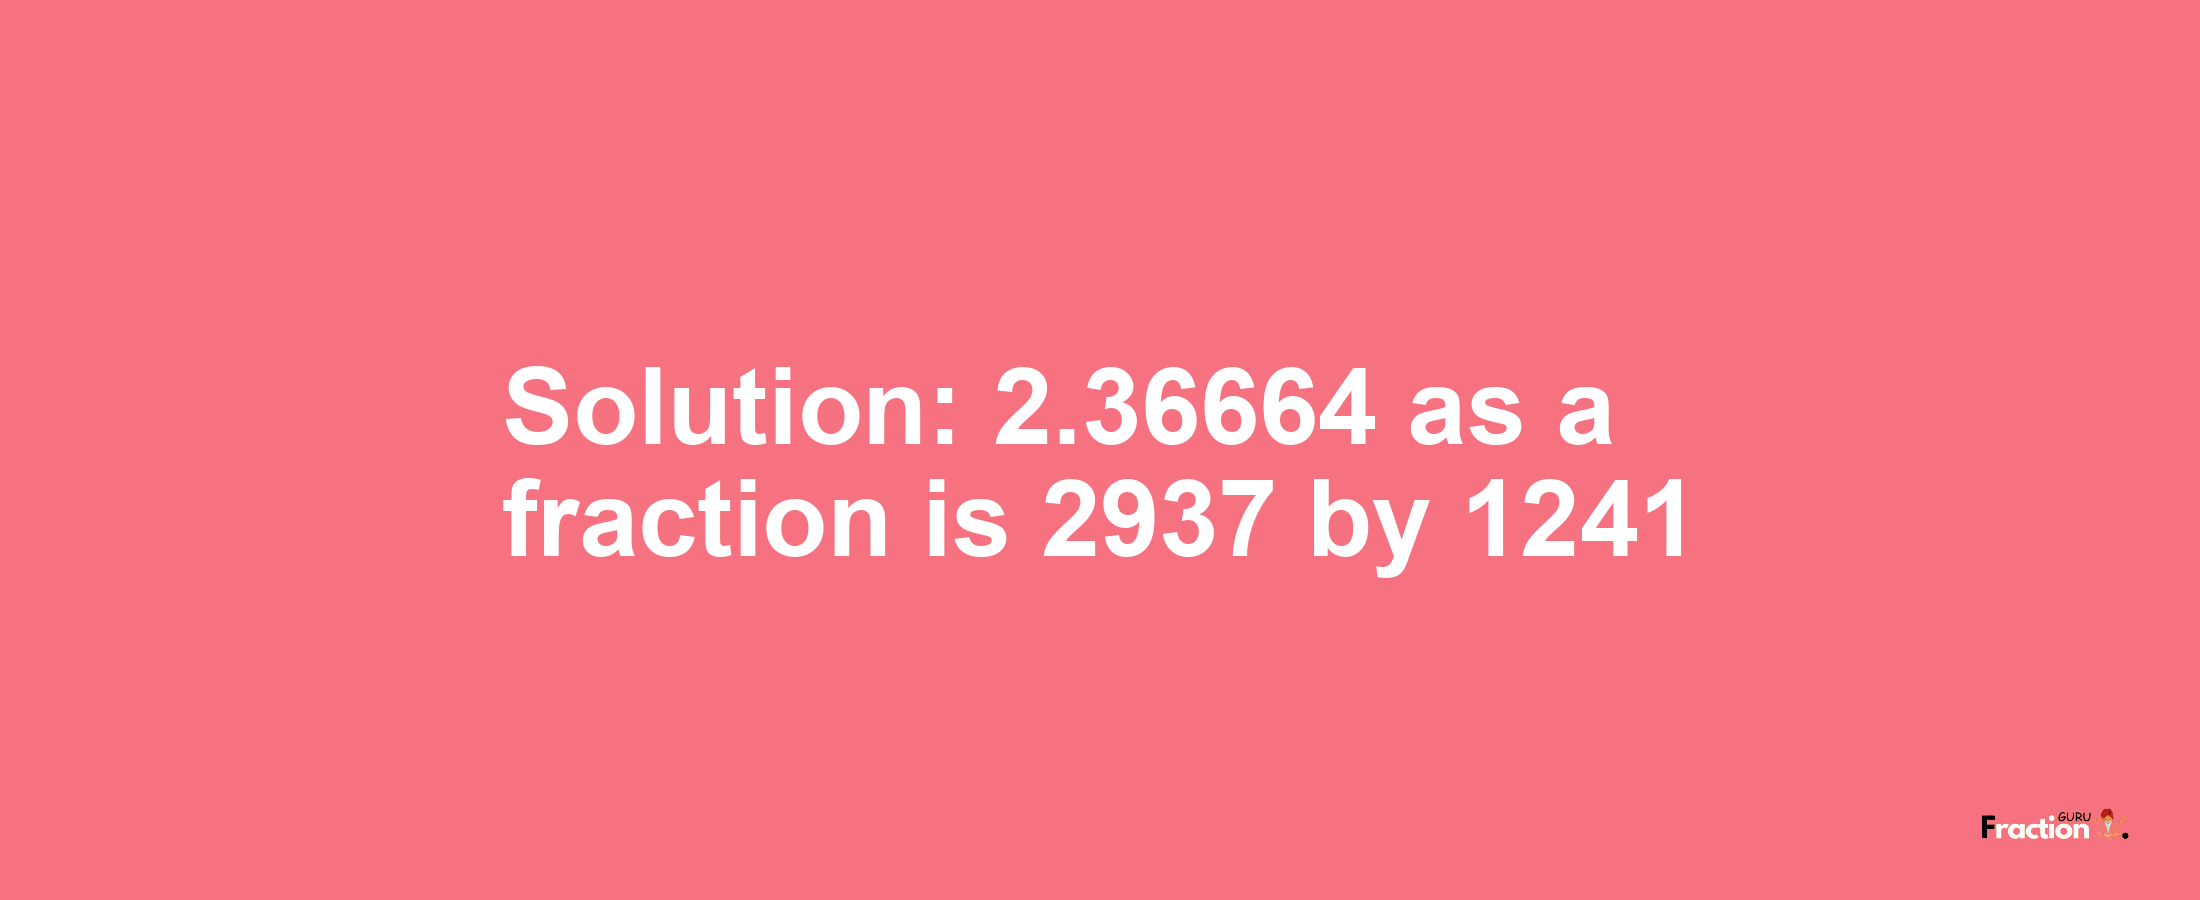 Solution:2.36664 as a fraction is 2937/1241